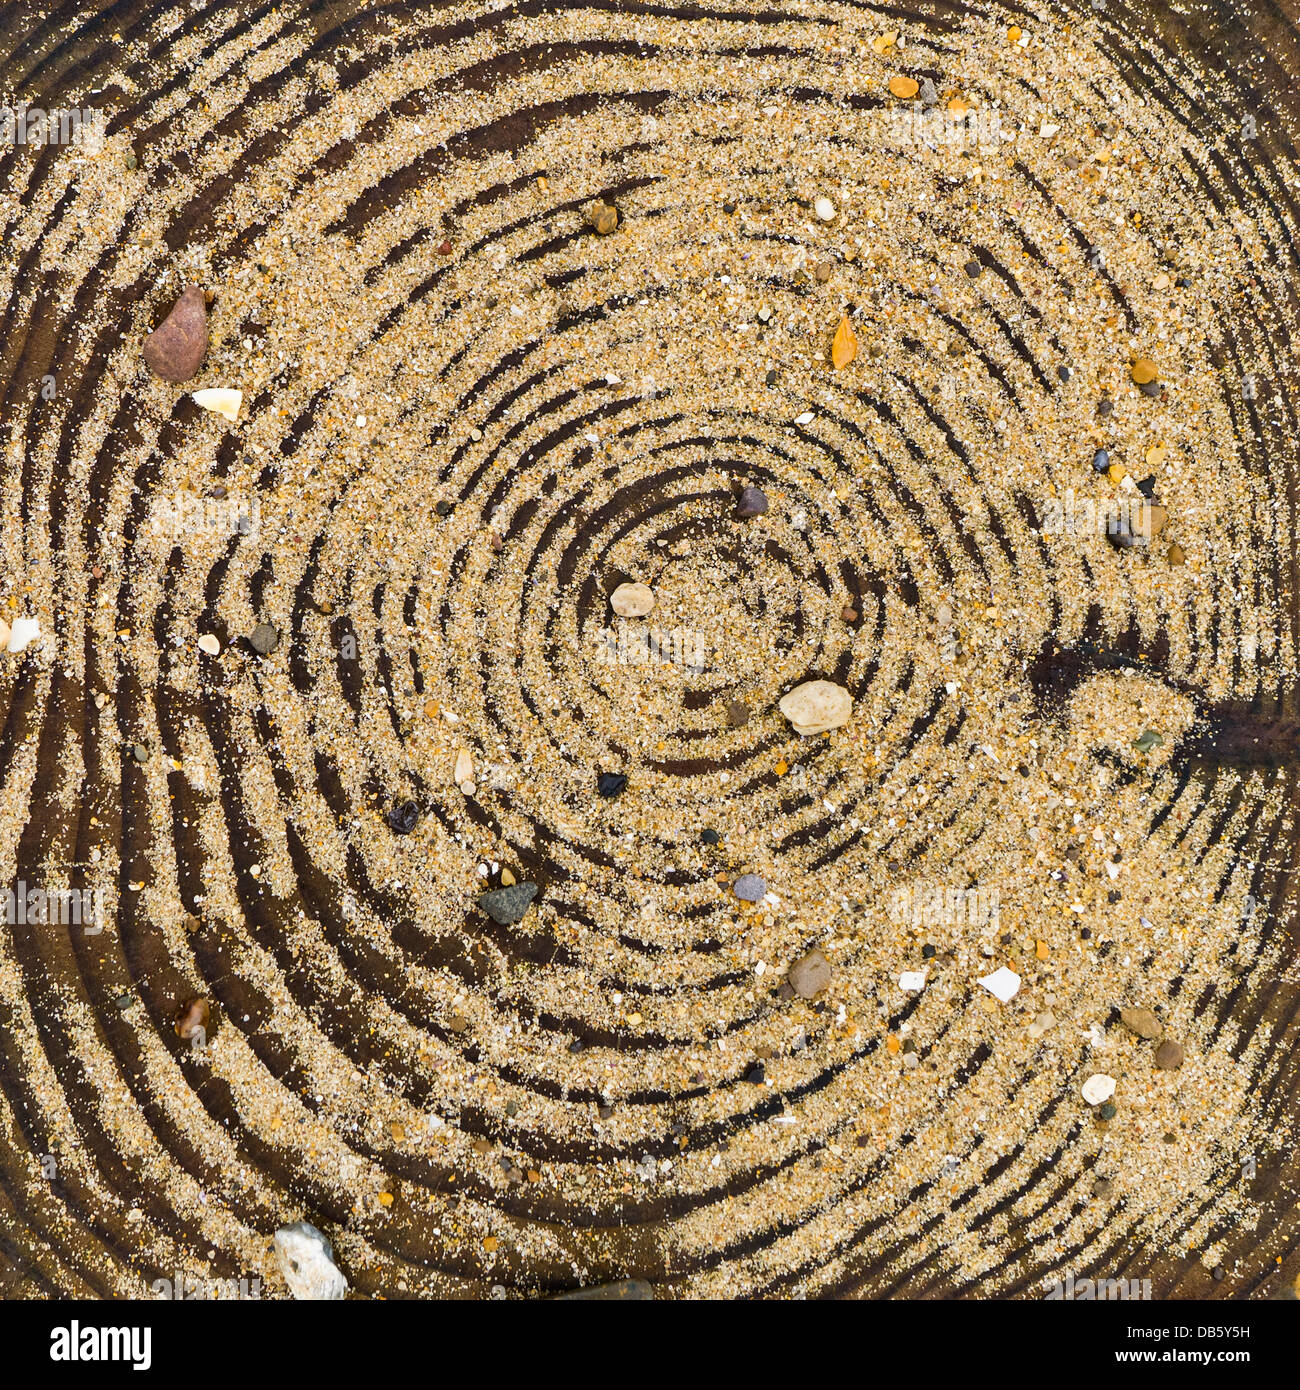 The top of a wooden post at the coast, part of a groyne, showing concentric circles, sand and small stones. Stock Photo